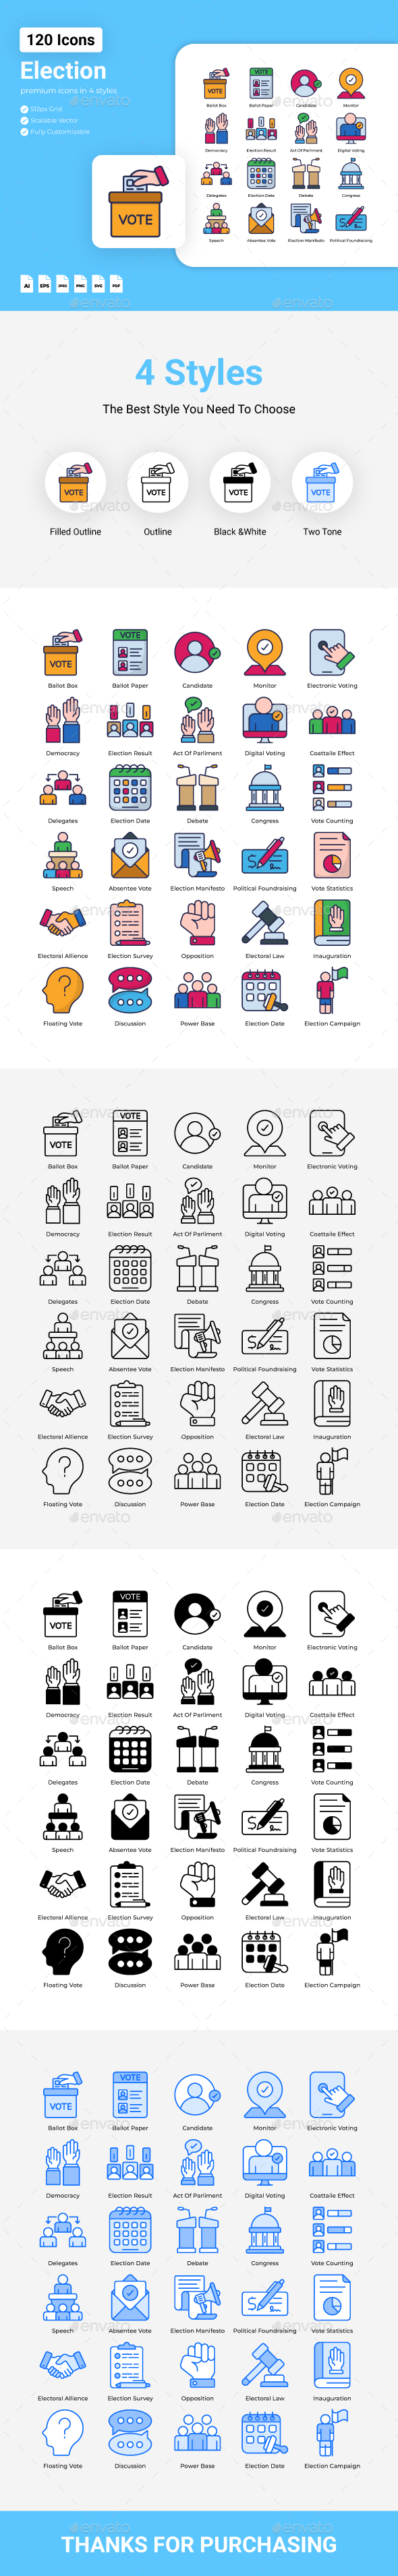 [DOWNLOAD]Election Icons